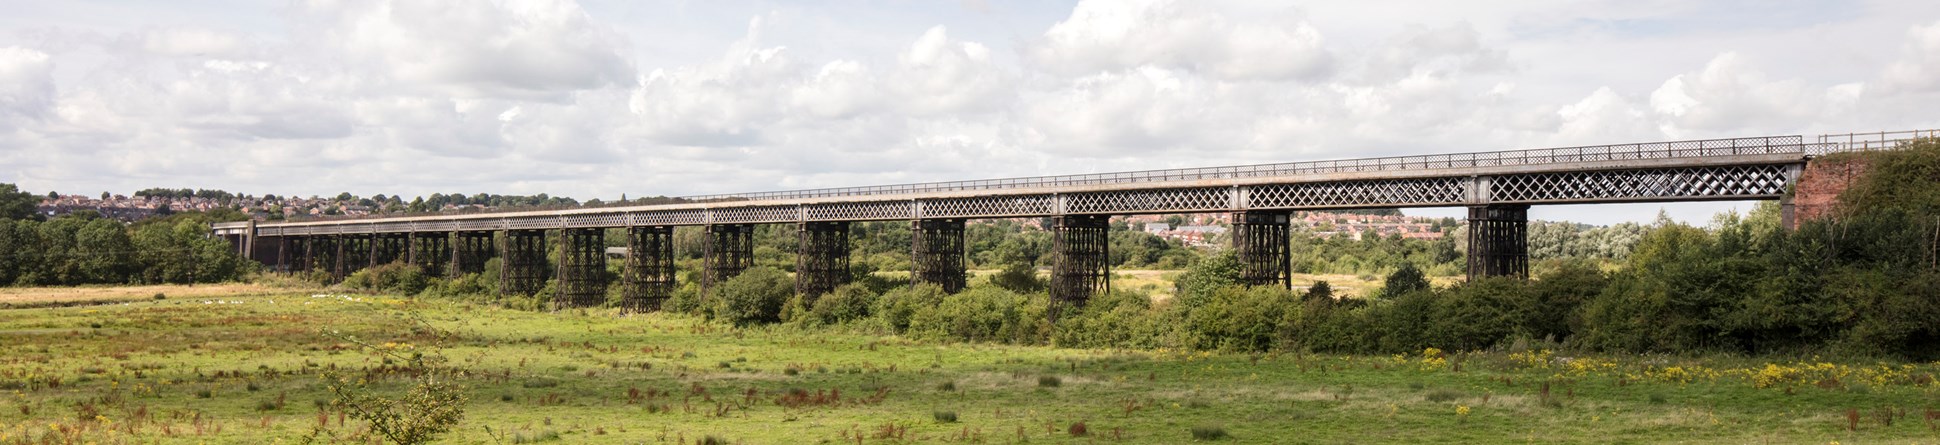 Bennerley Viaduct photographed from a distance with a field with yellow flowers in the foreground